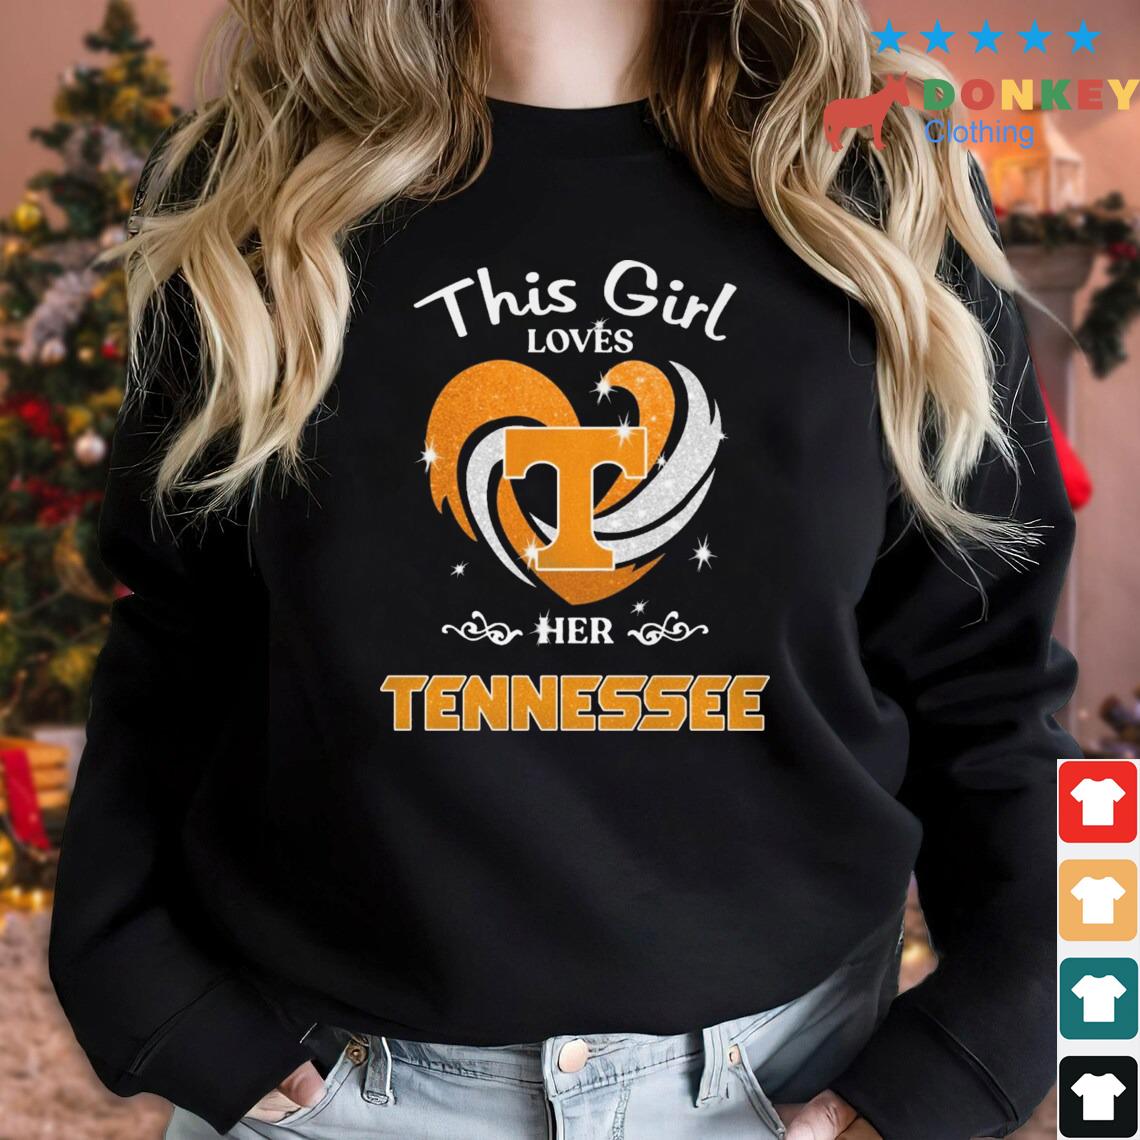 Tennessee Volunteers This Girl Loves Her Shirt